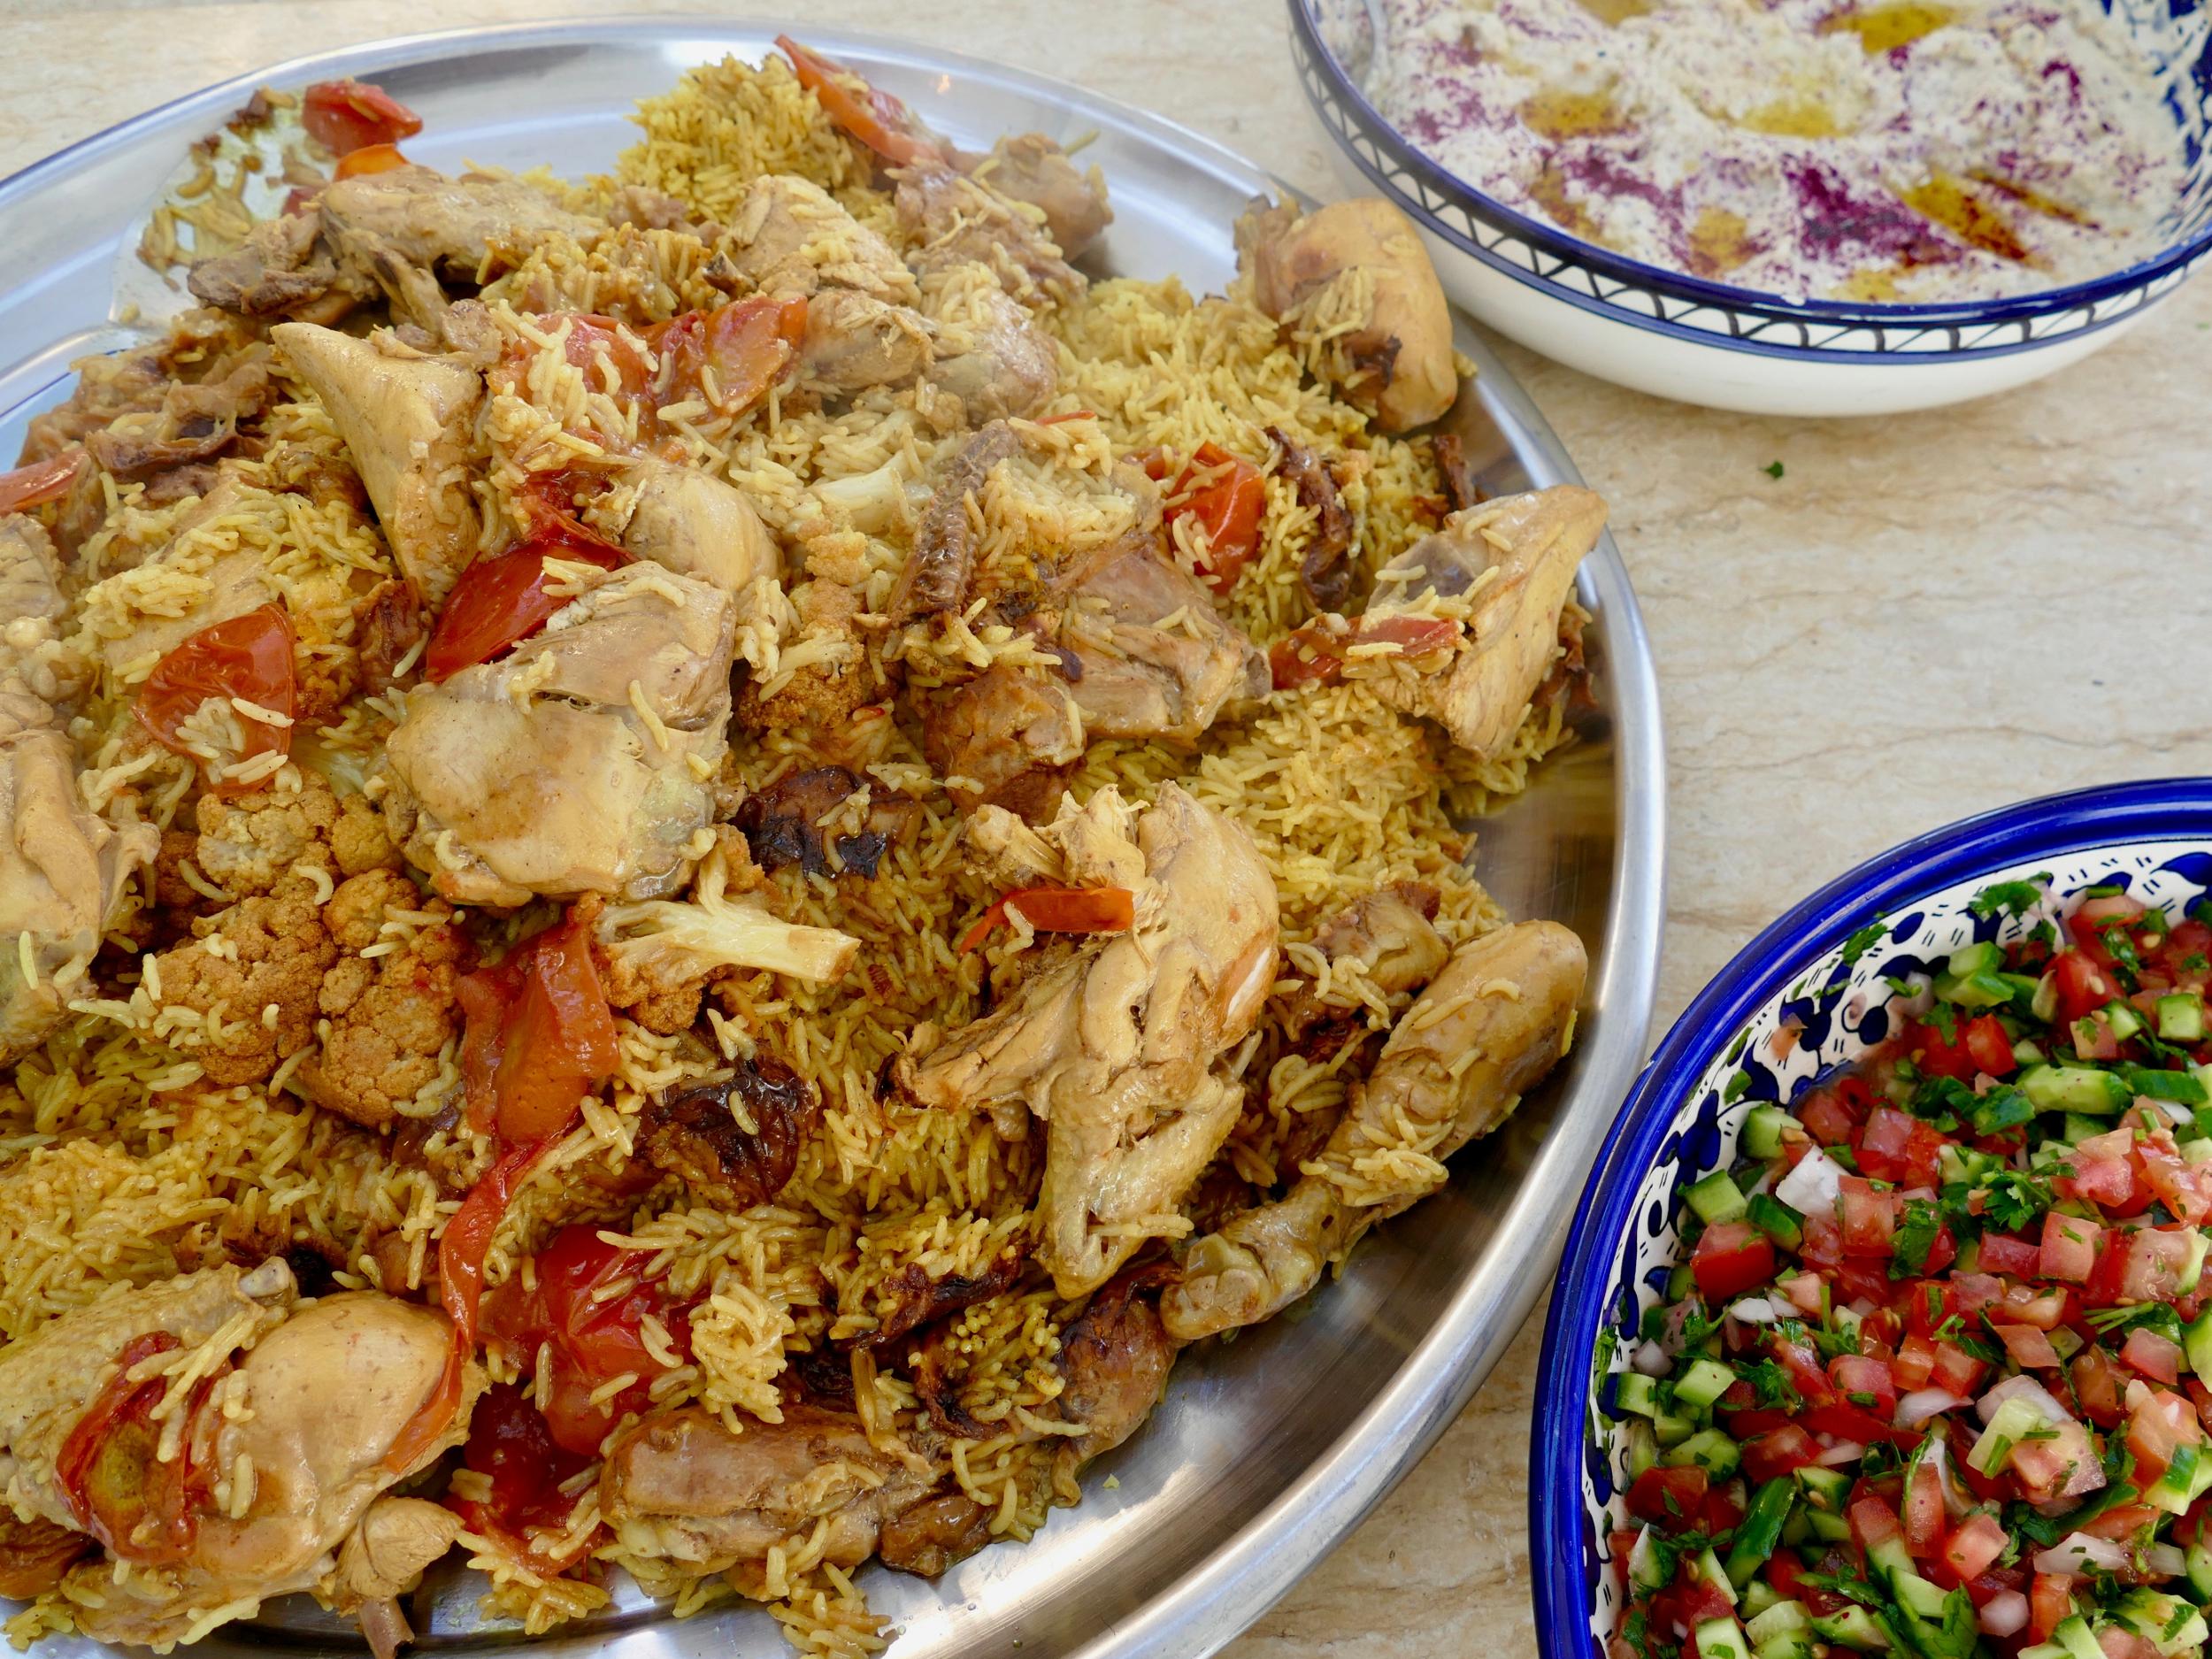 Dinner at Beit Sitti, a cooking school and social project rolled into one